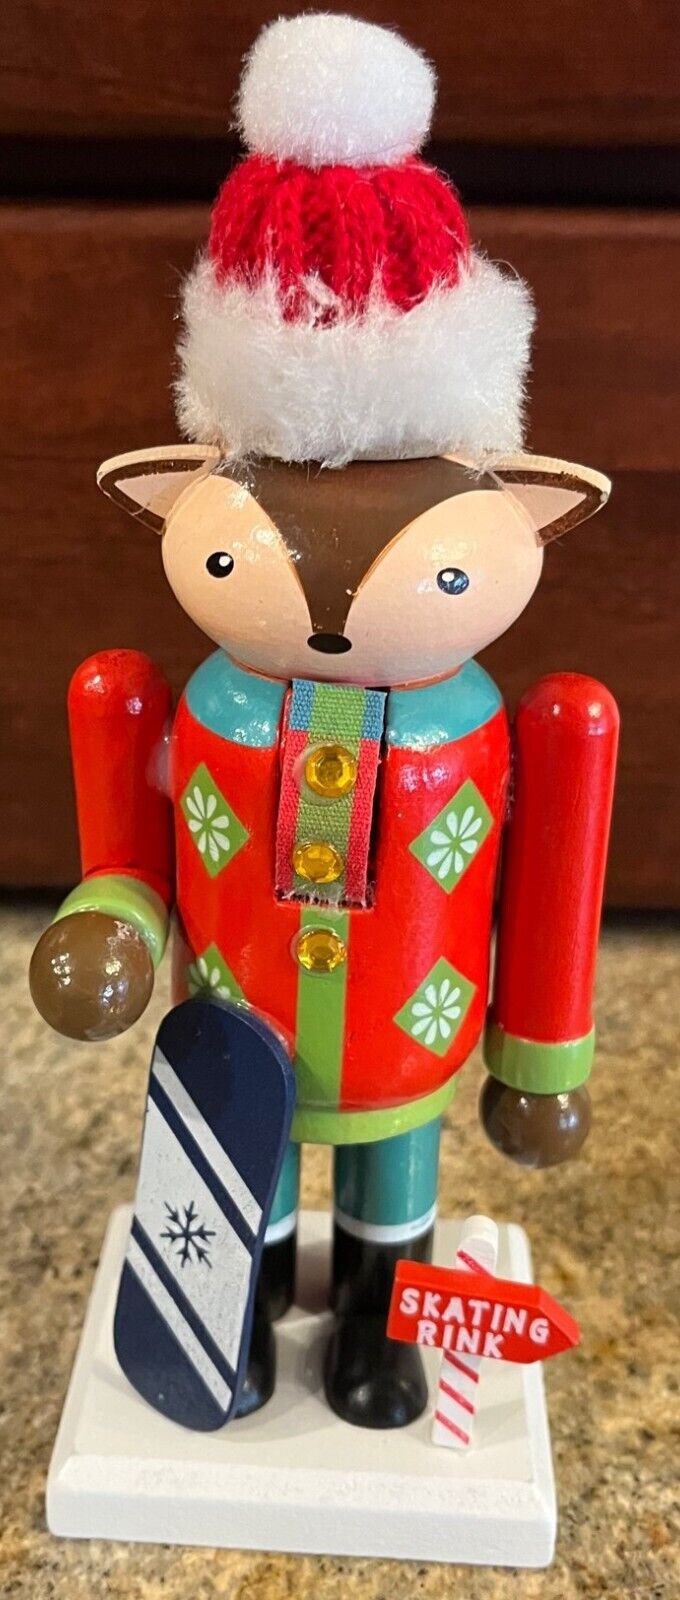 Christmas Chipmunk Skating Figure - 7 Inches Tall - Winter Sports - BRAND NEW